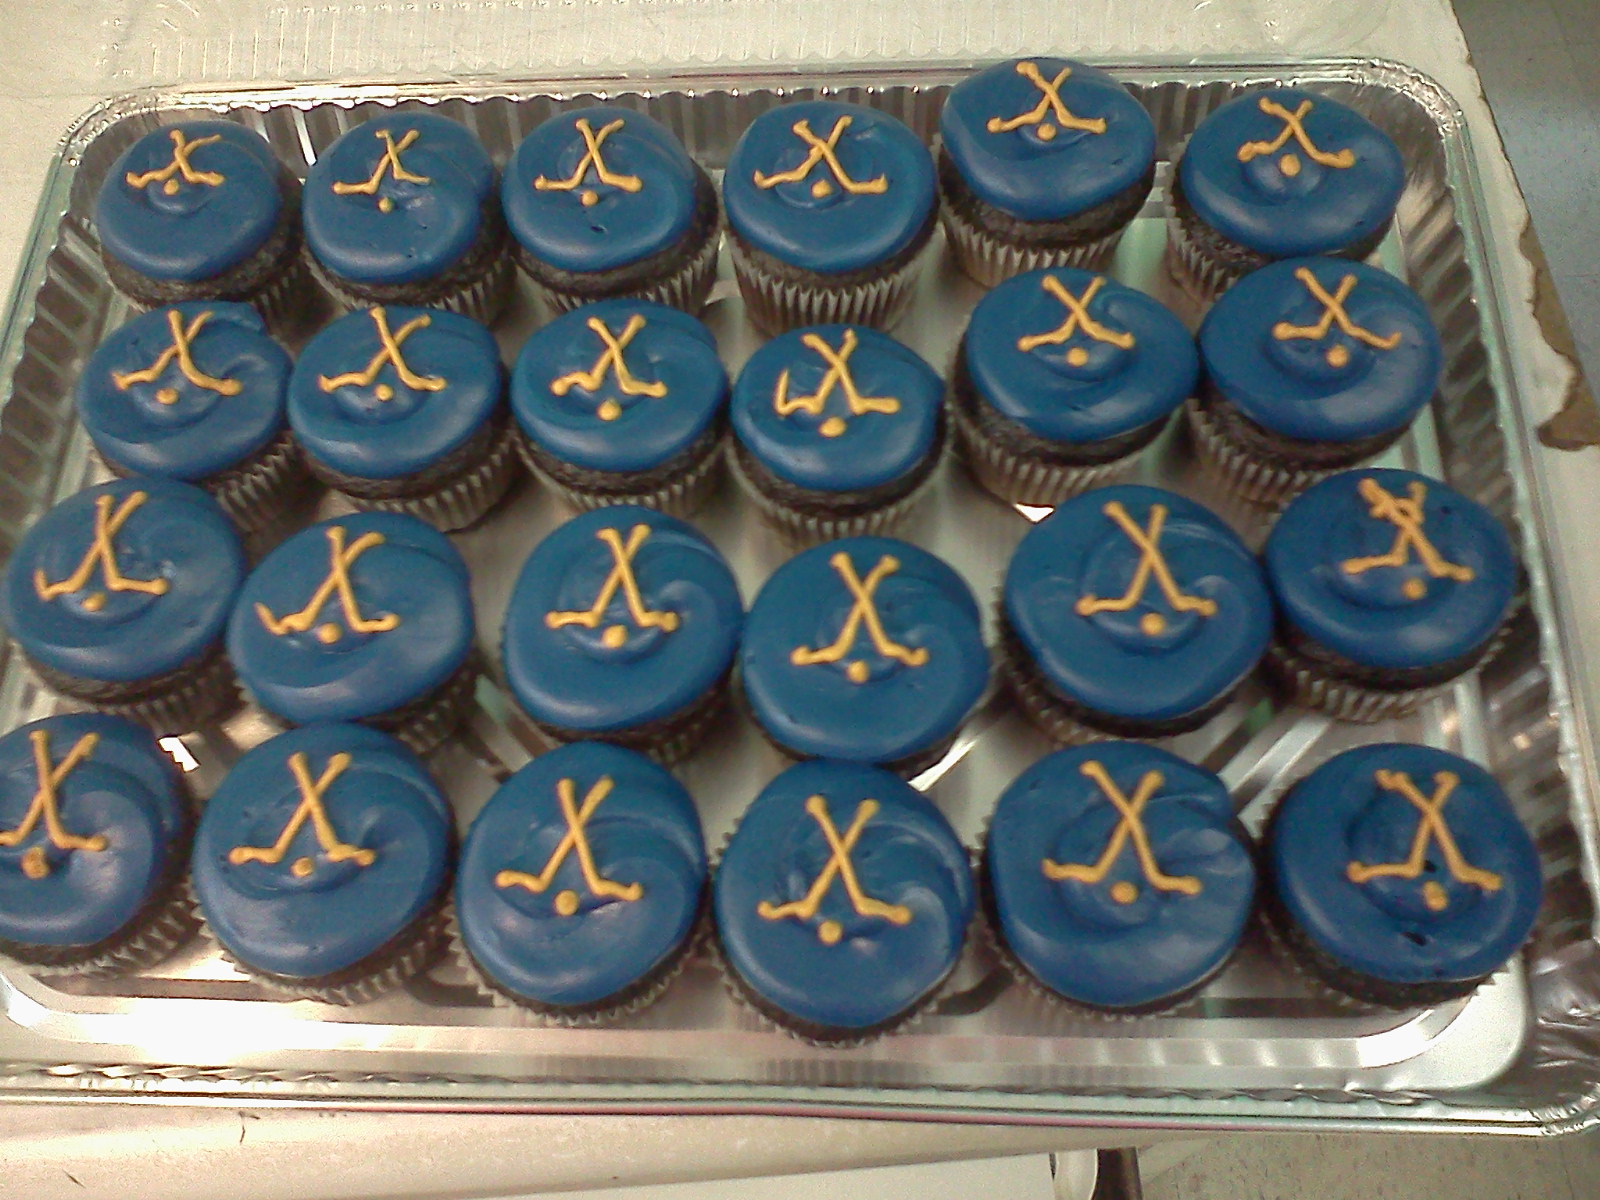 Field Hockey Cakes and Cupcakes